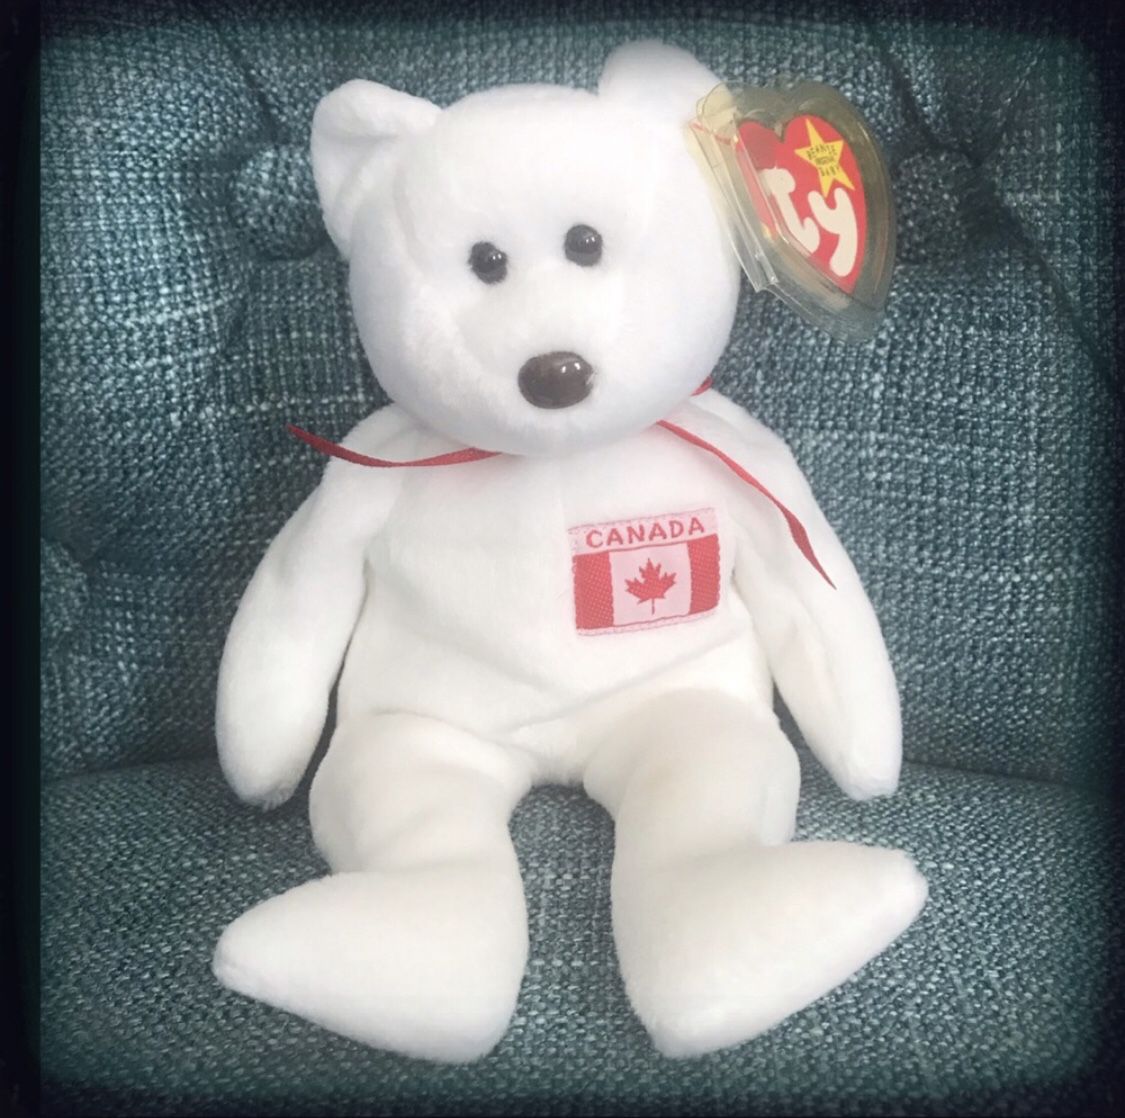 Ty Beanie Babies Maple Stuffed Toy Bear NWT White Canadian Bear DOB: July 1, 1996 Hang Tag Errors: Misspelled City Space Before Question Mark New With